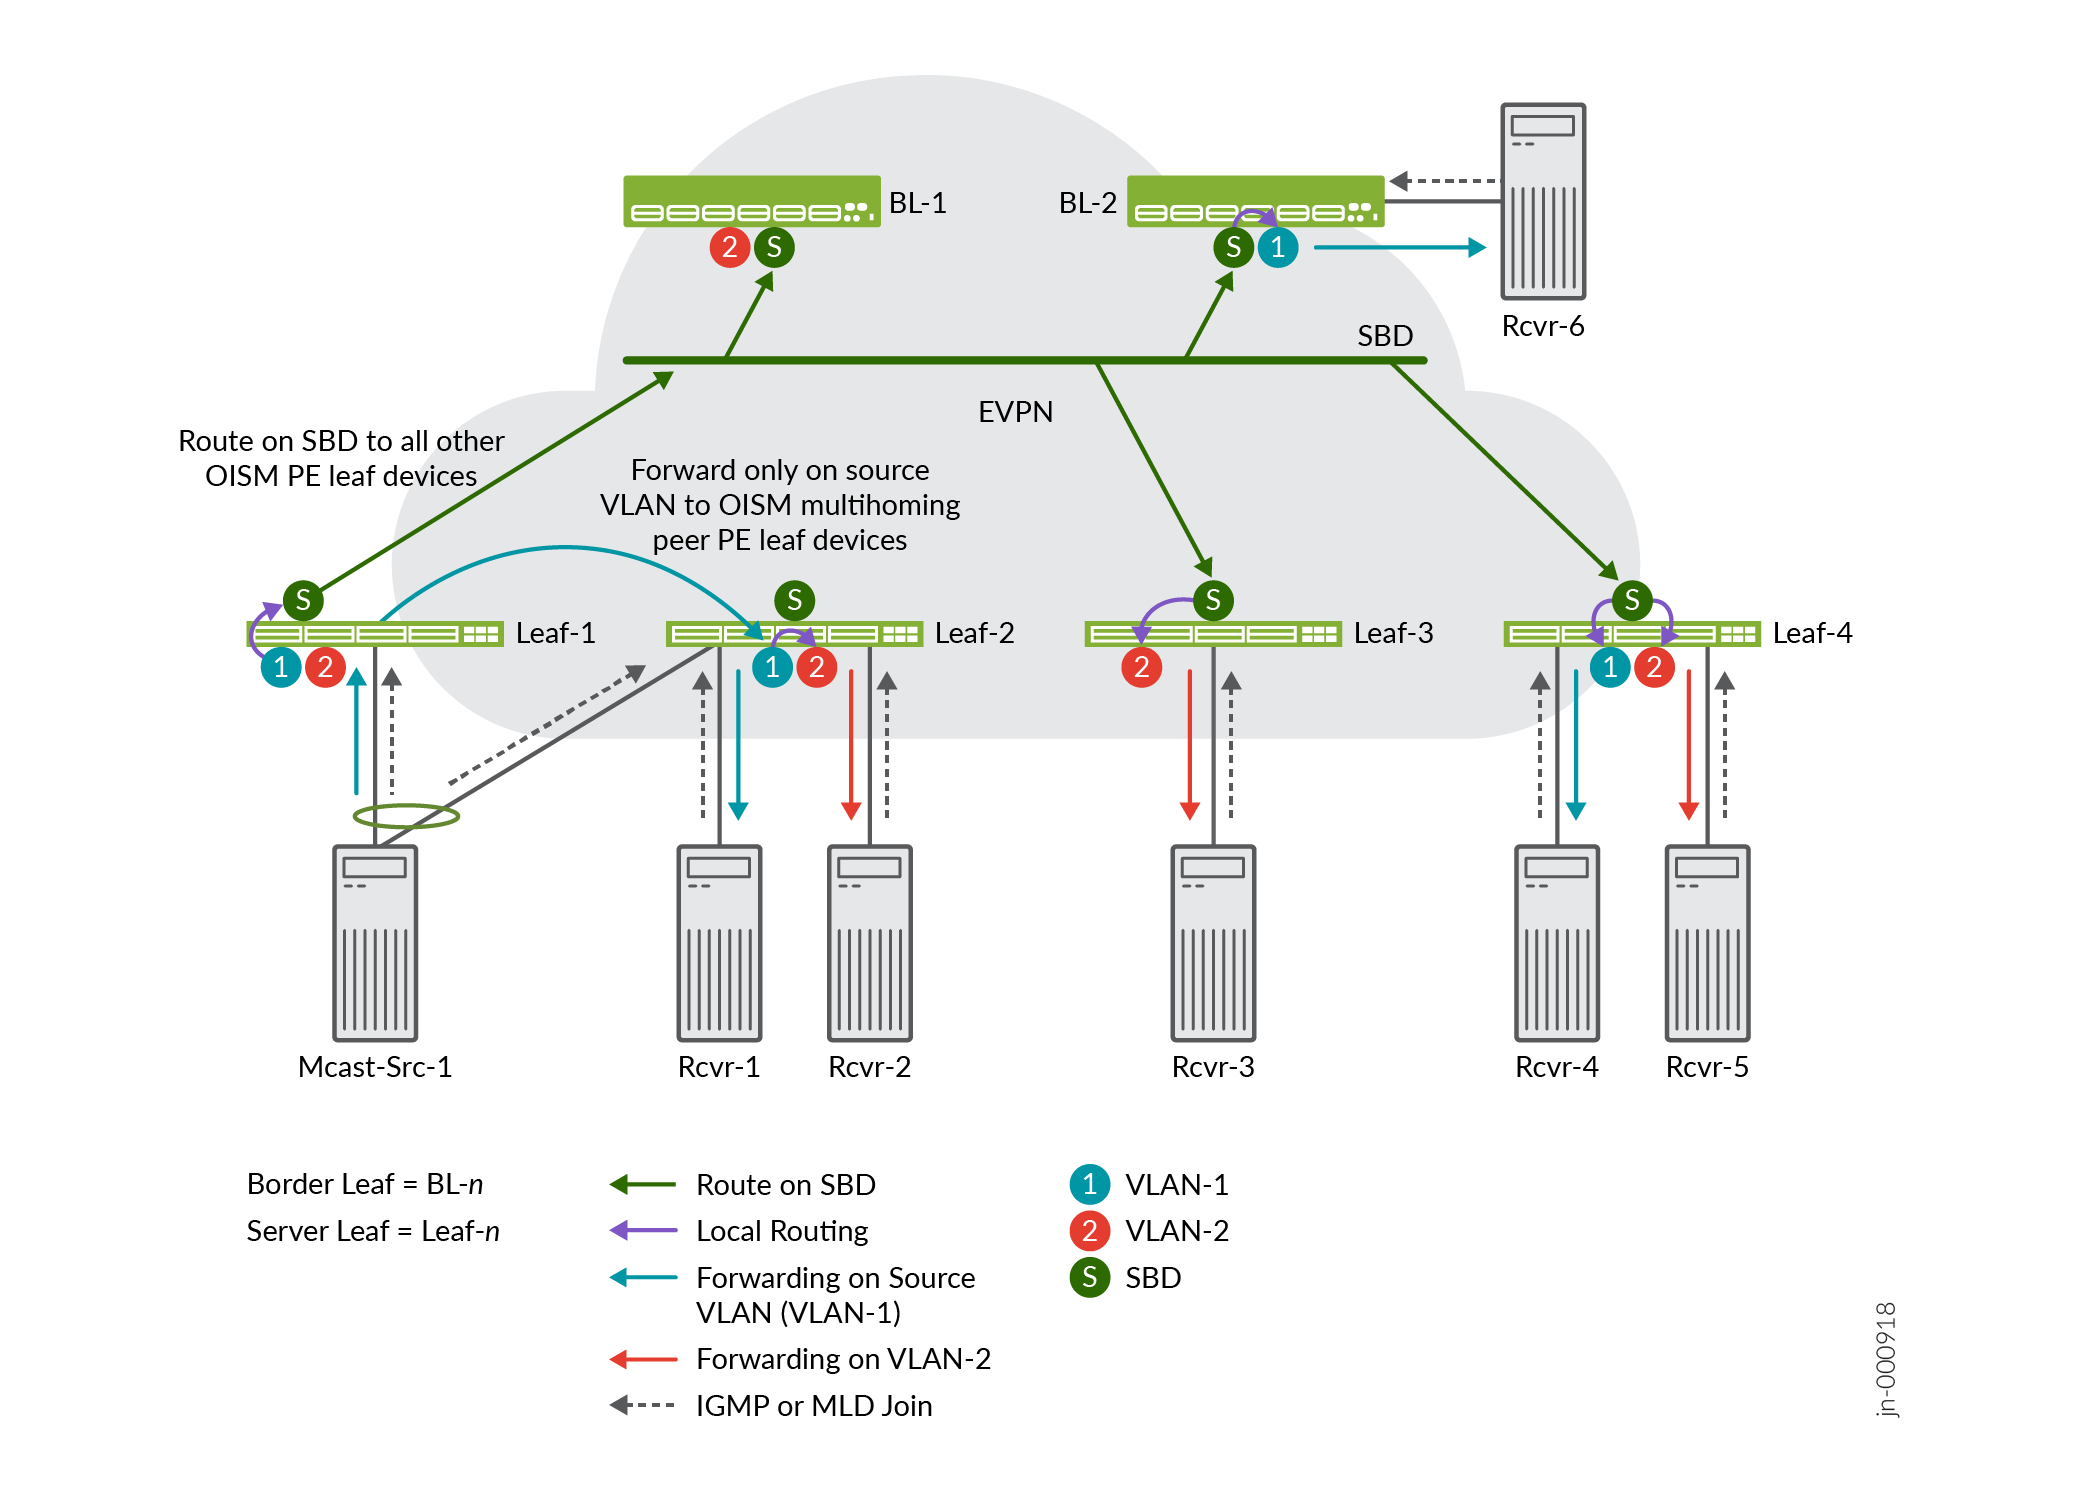 Enhanced OISM—Forward on Source VLAN Only to Multihoming Peers and Otherwise Route Only on SBD